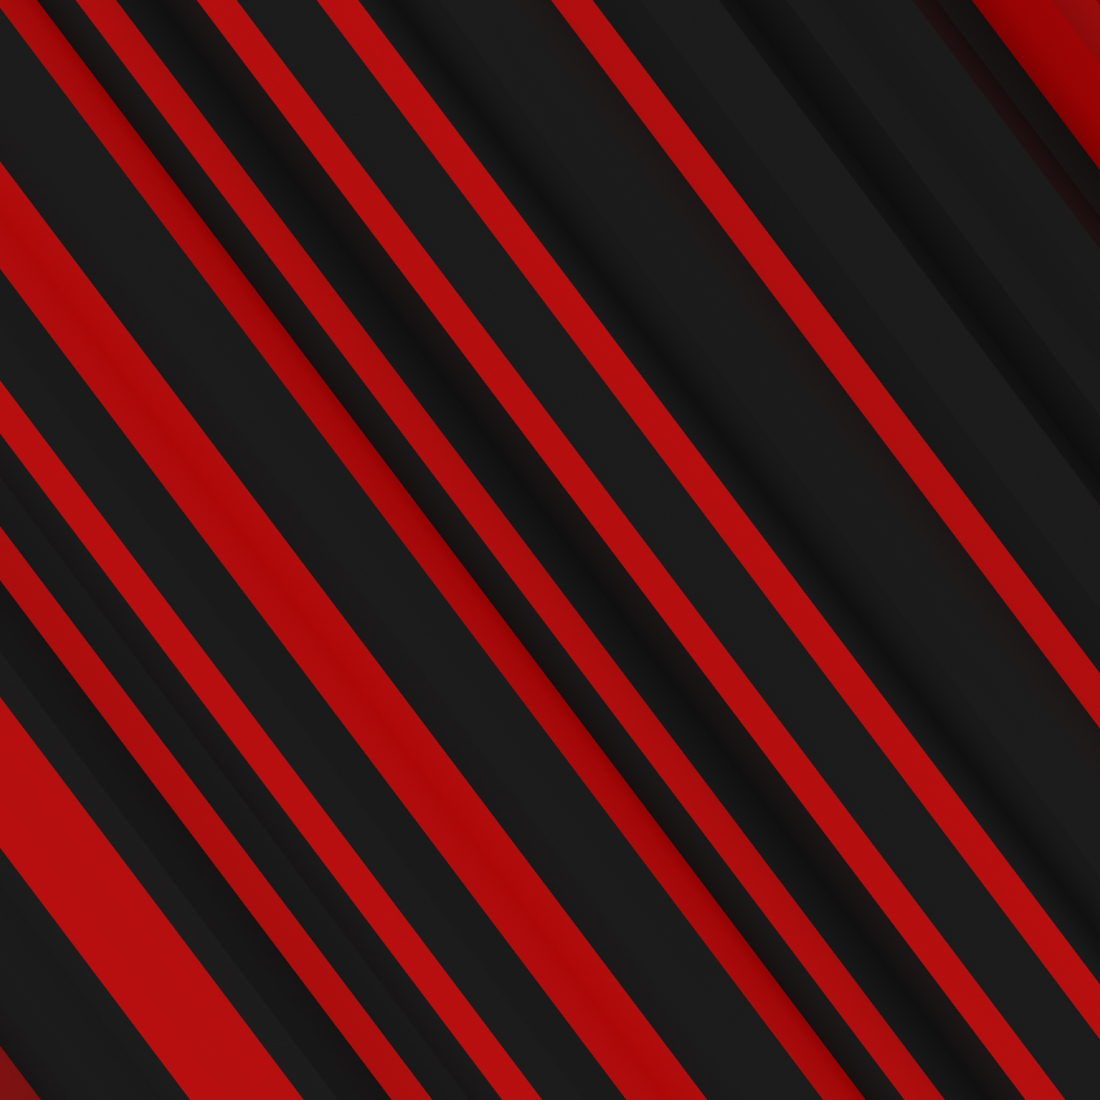 Abstract Striped Backgrounds Red Black cover image.